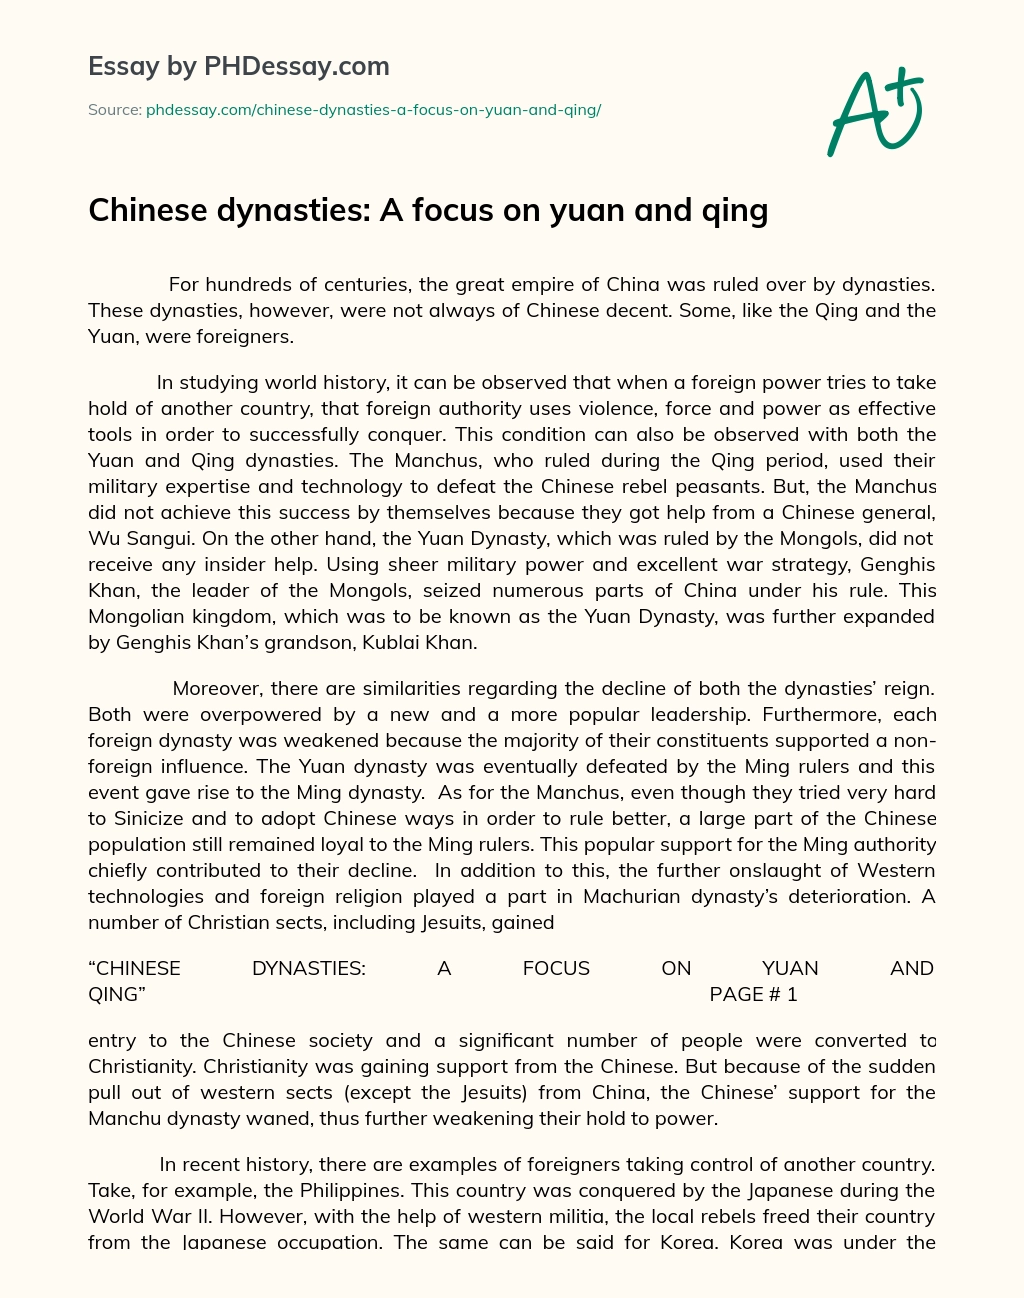 Chinese Dynasties: A Focus On Yuan and Qing essay